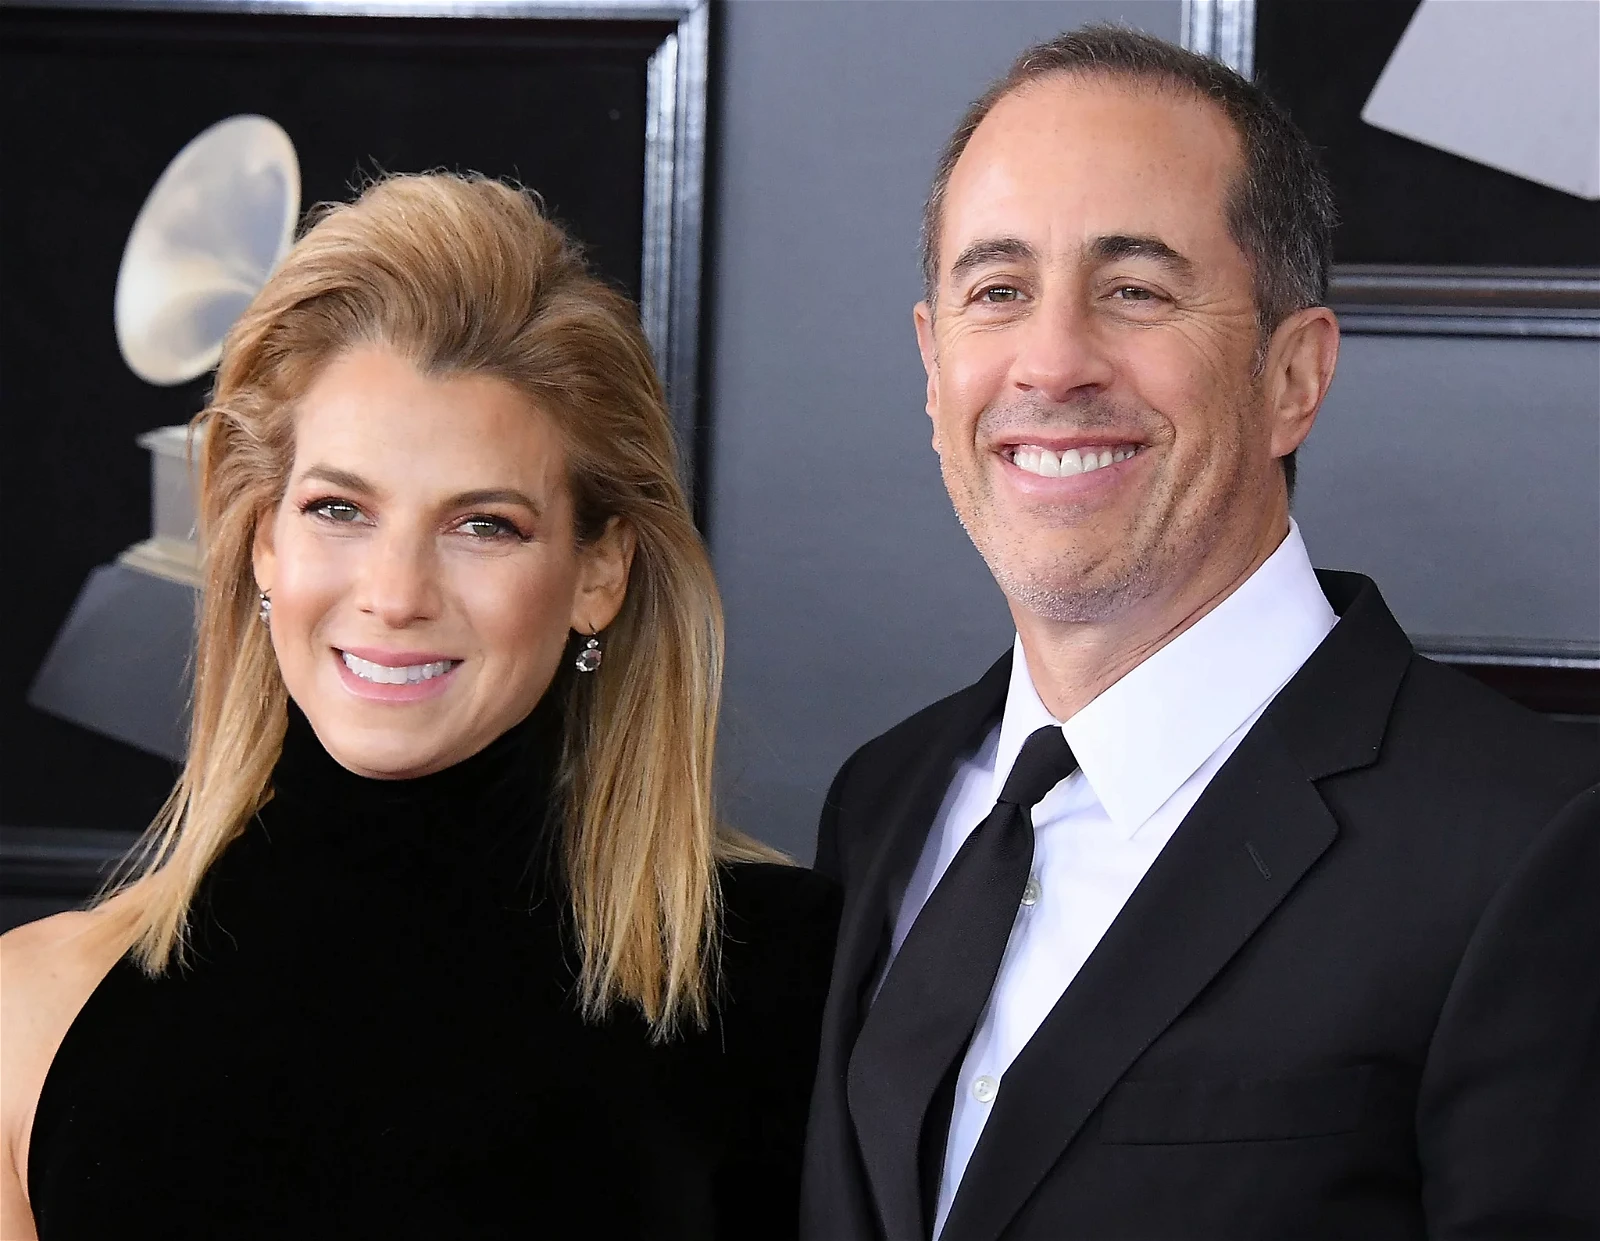 Jerry Seinfeld and his wife Jessica Seinfeld.